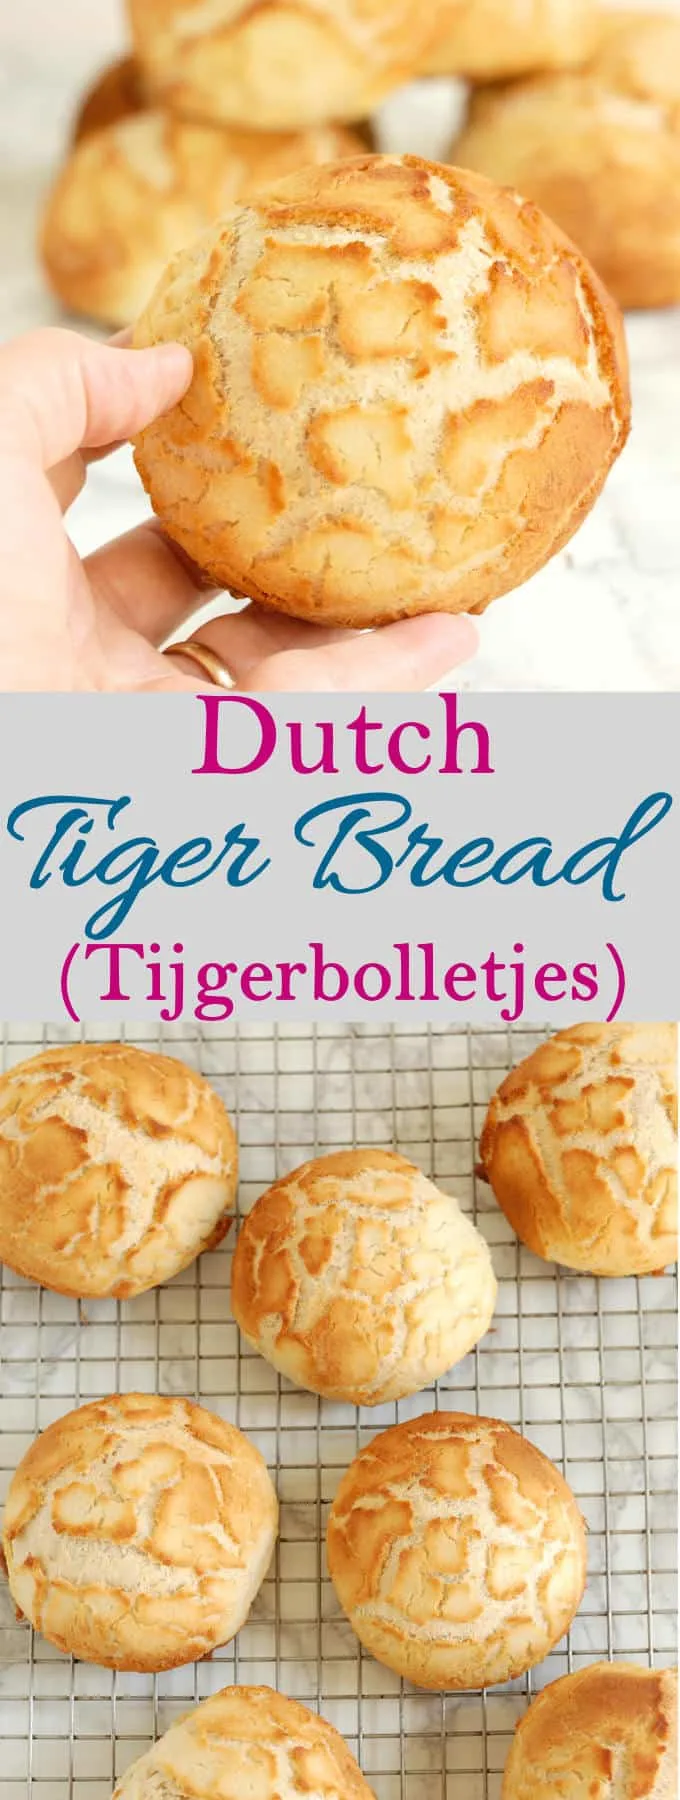 Learn how to make super-crunchy Dutch Tiger Bread (tijgerbolletjes) from scratch. The secret to the crunchy topping is surprisingly easy!